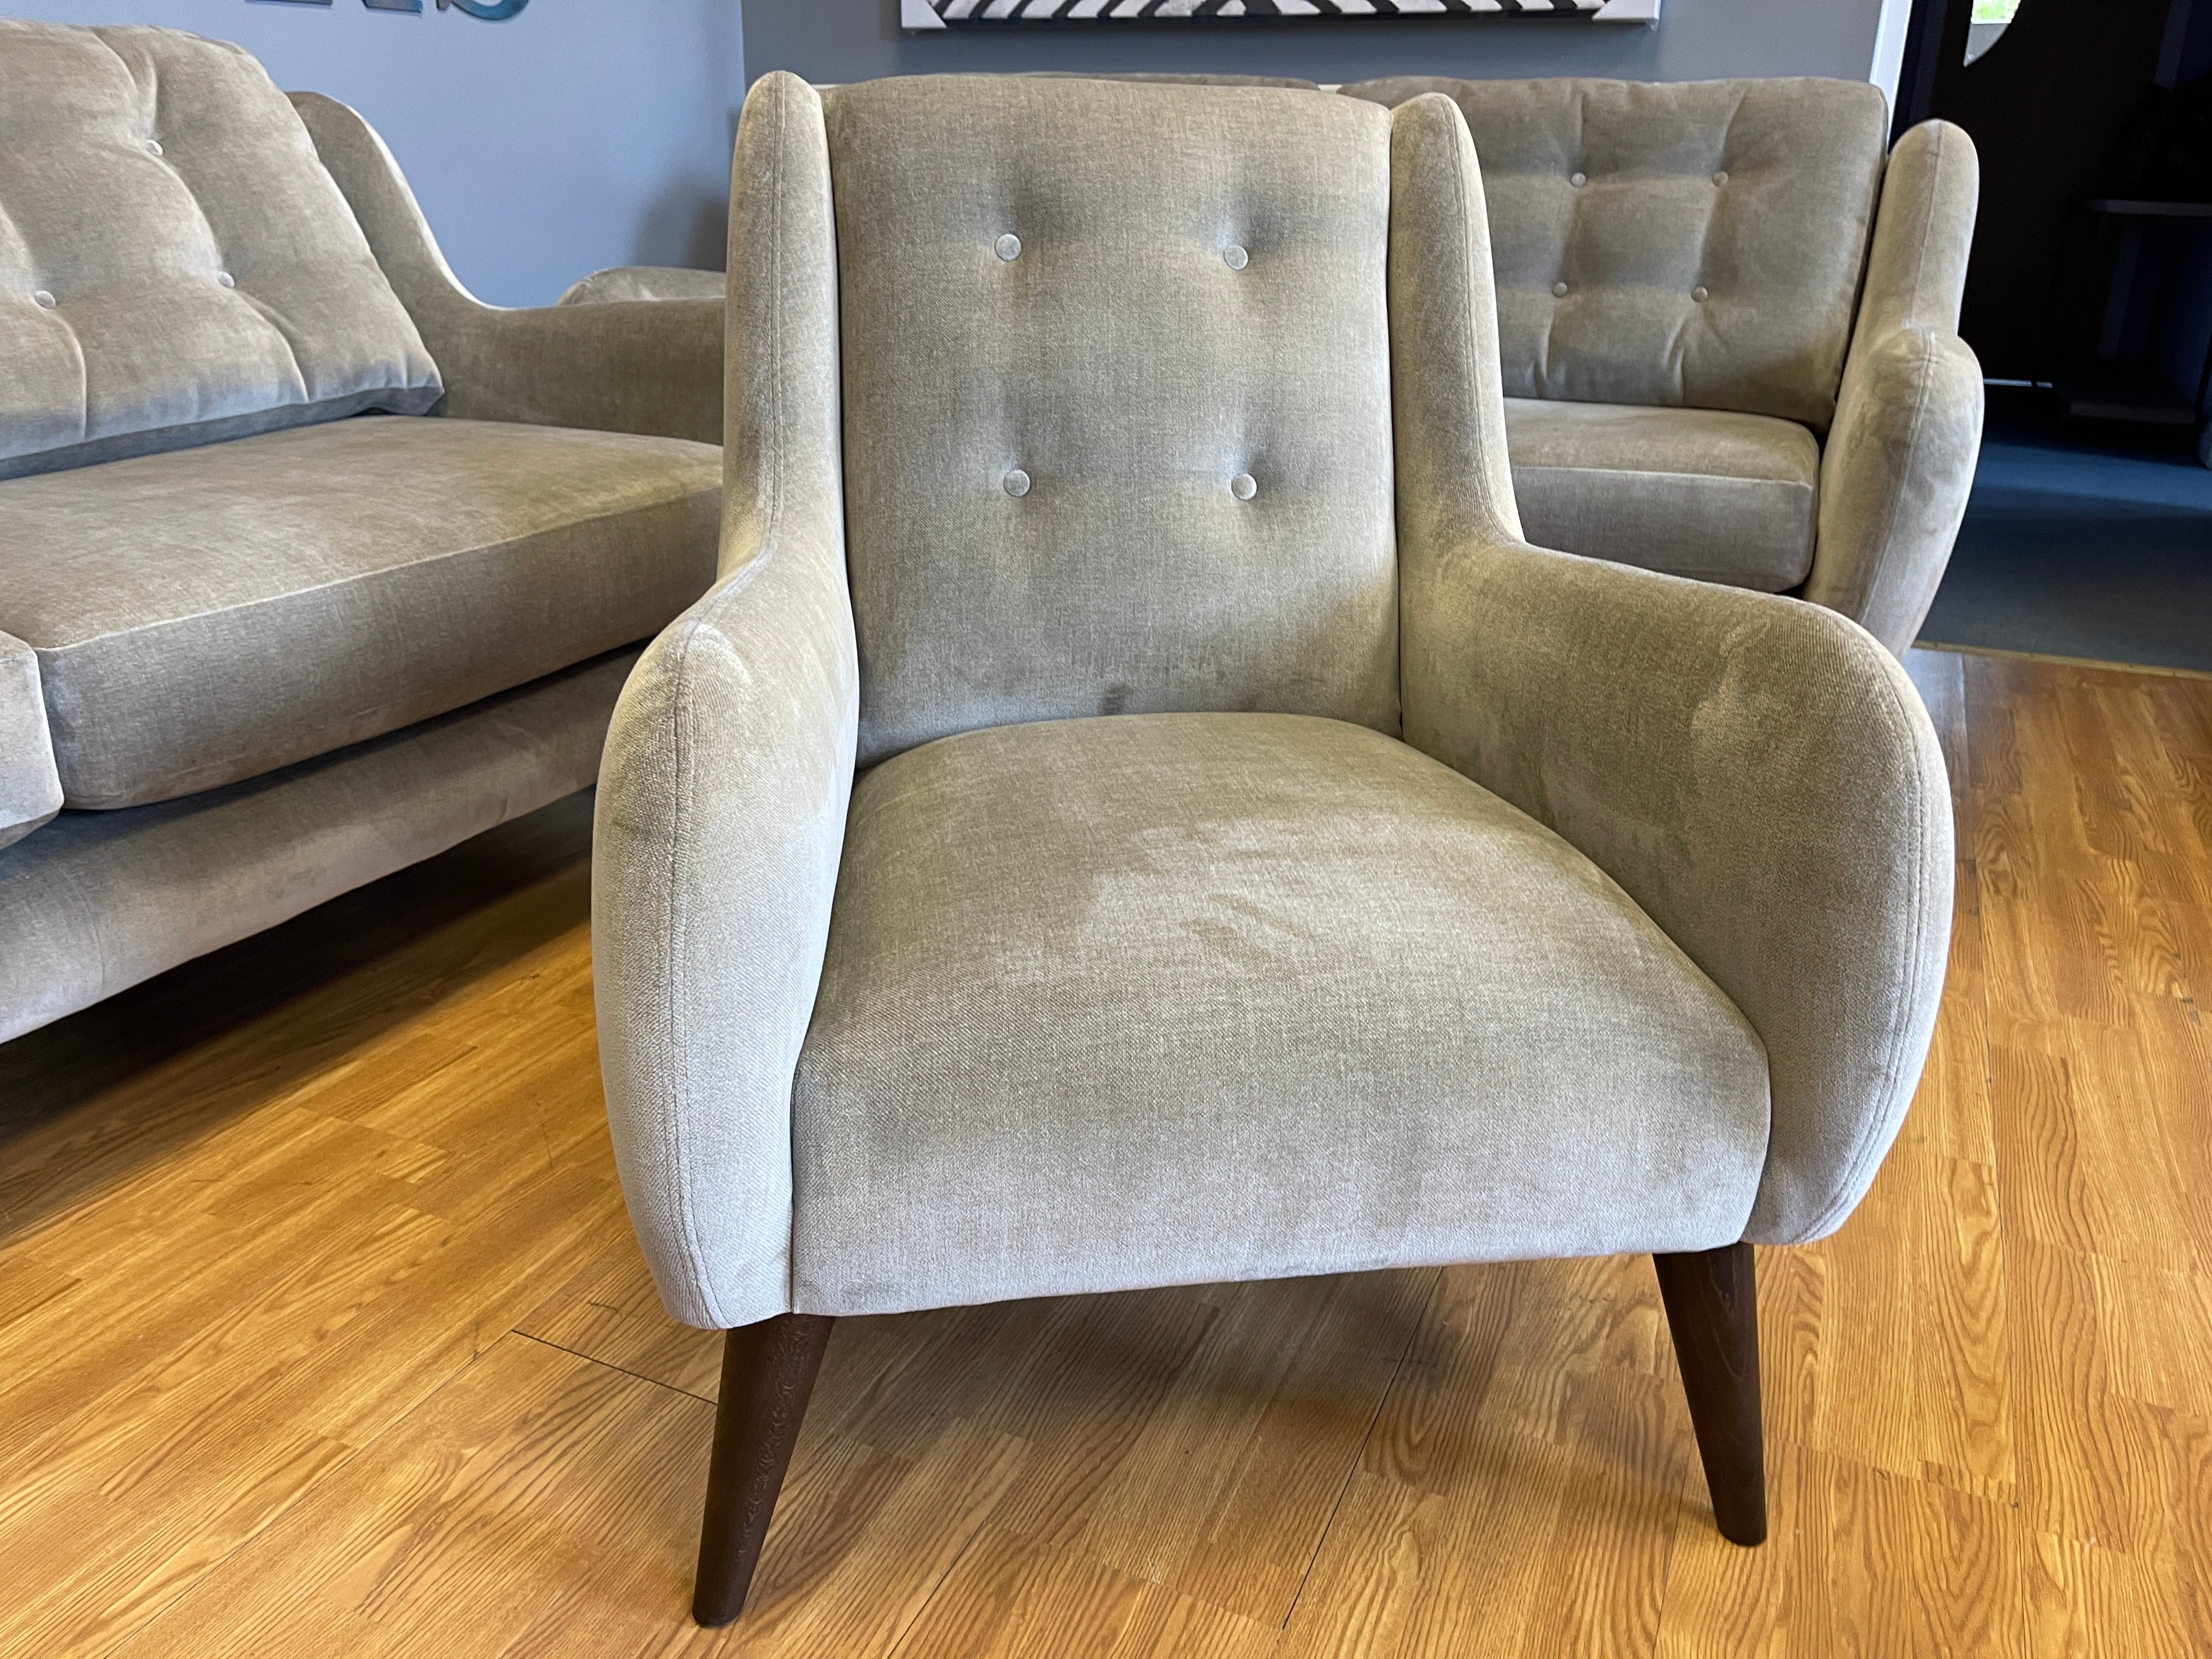 FRENCH CONNECTION CAMDEN accent chair in taupe / champagne chenille fabric